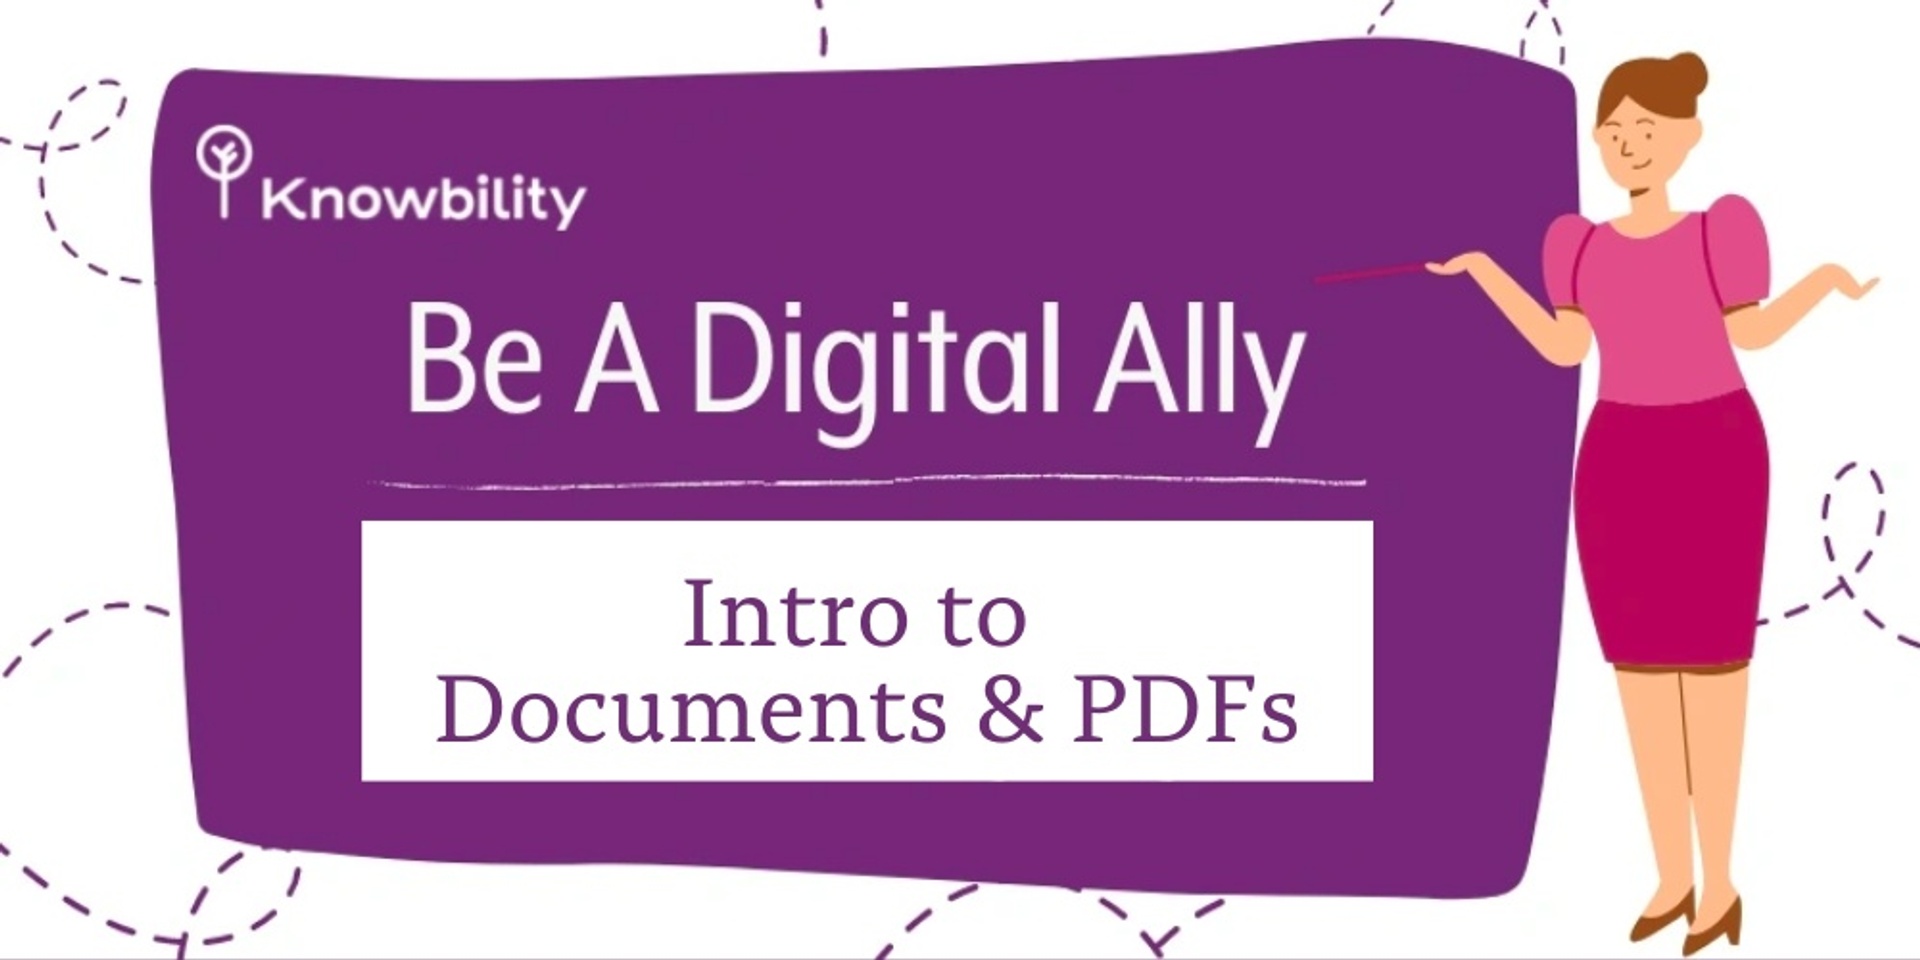 Be A Digital Ally: Intro to Documents & PDFs